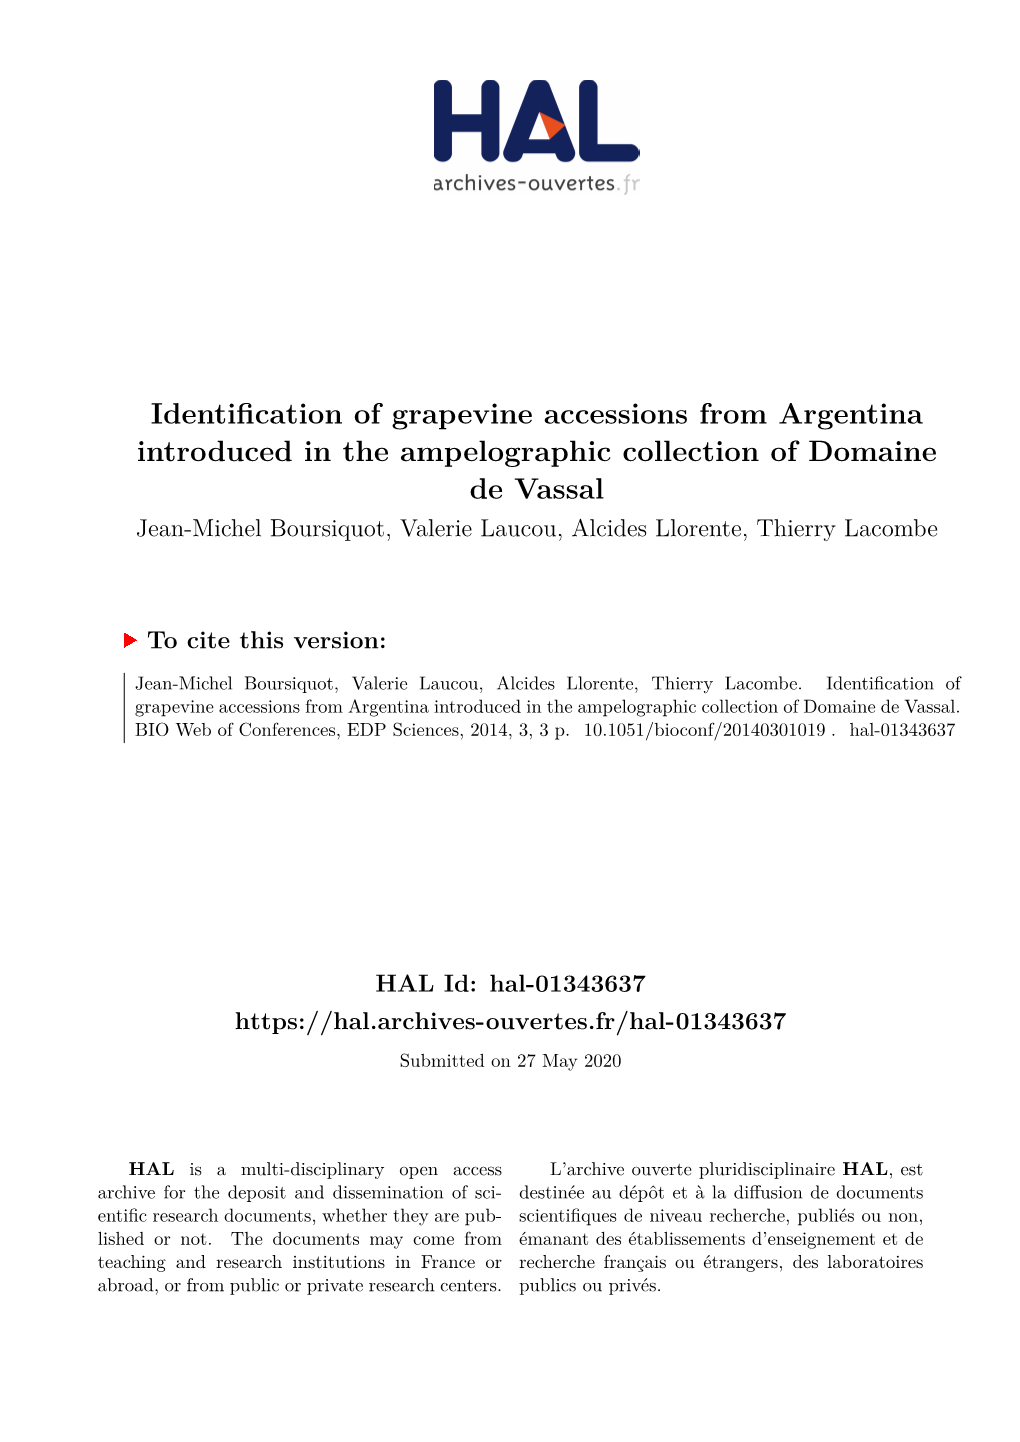 Identification of Grapevine Accessions From